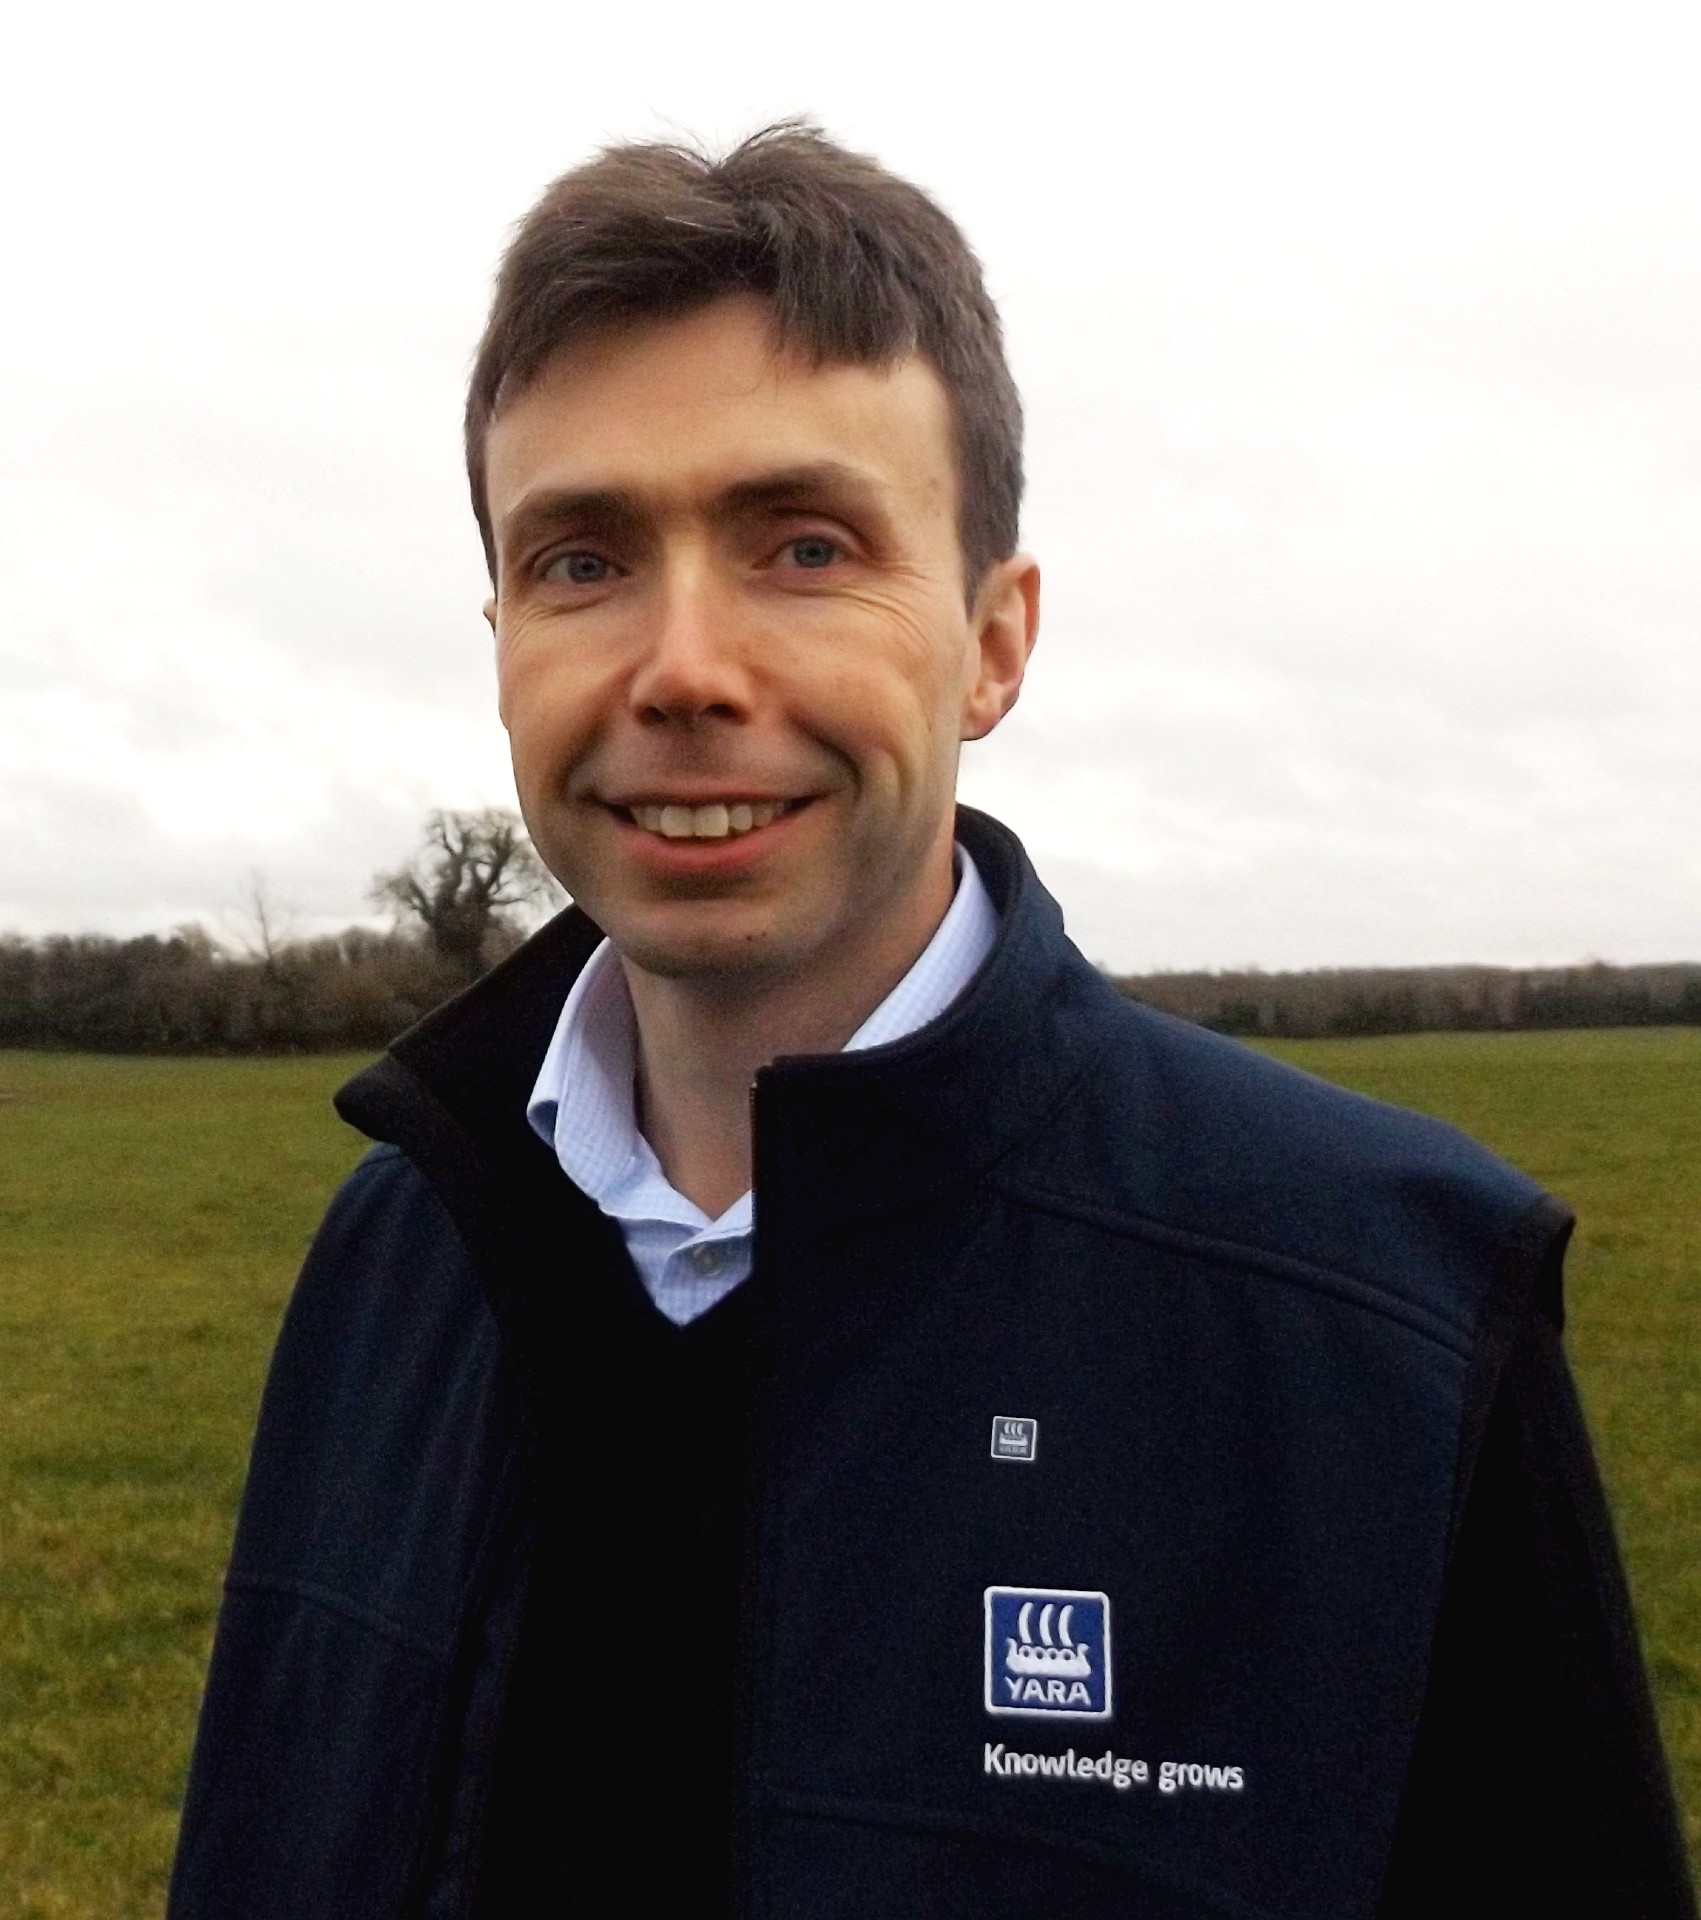 Philip Cosgrave, Country Grassland Agronomist at Yara,